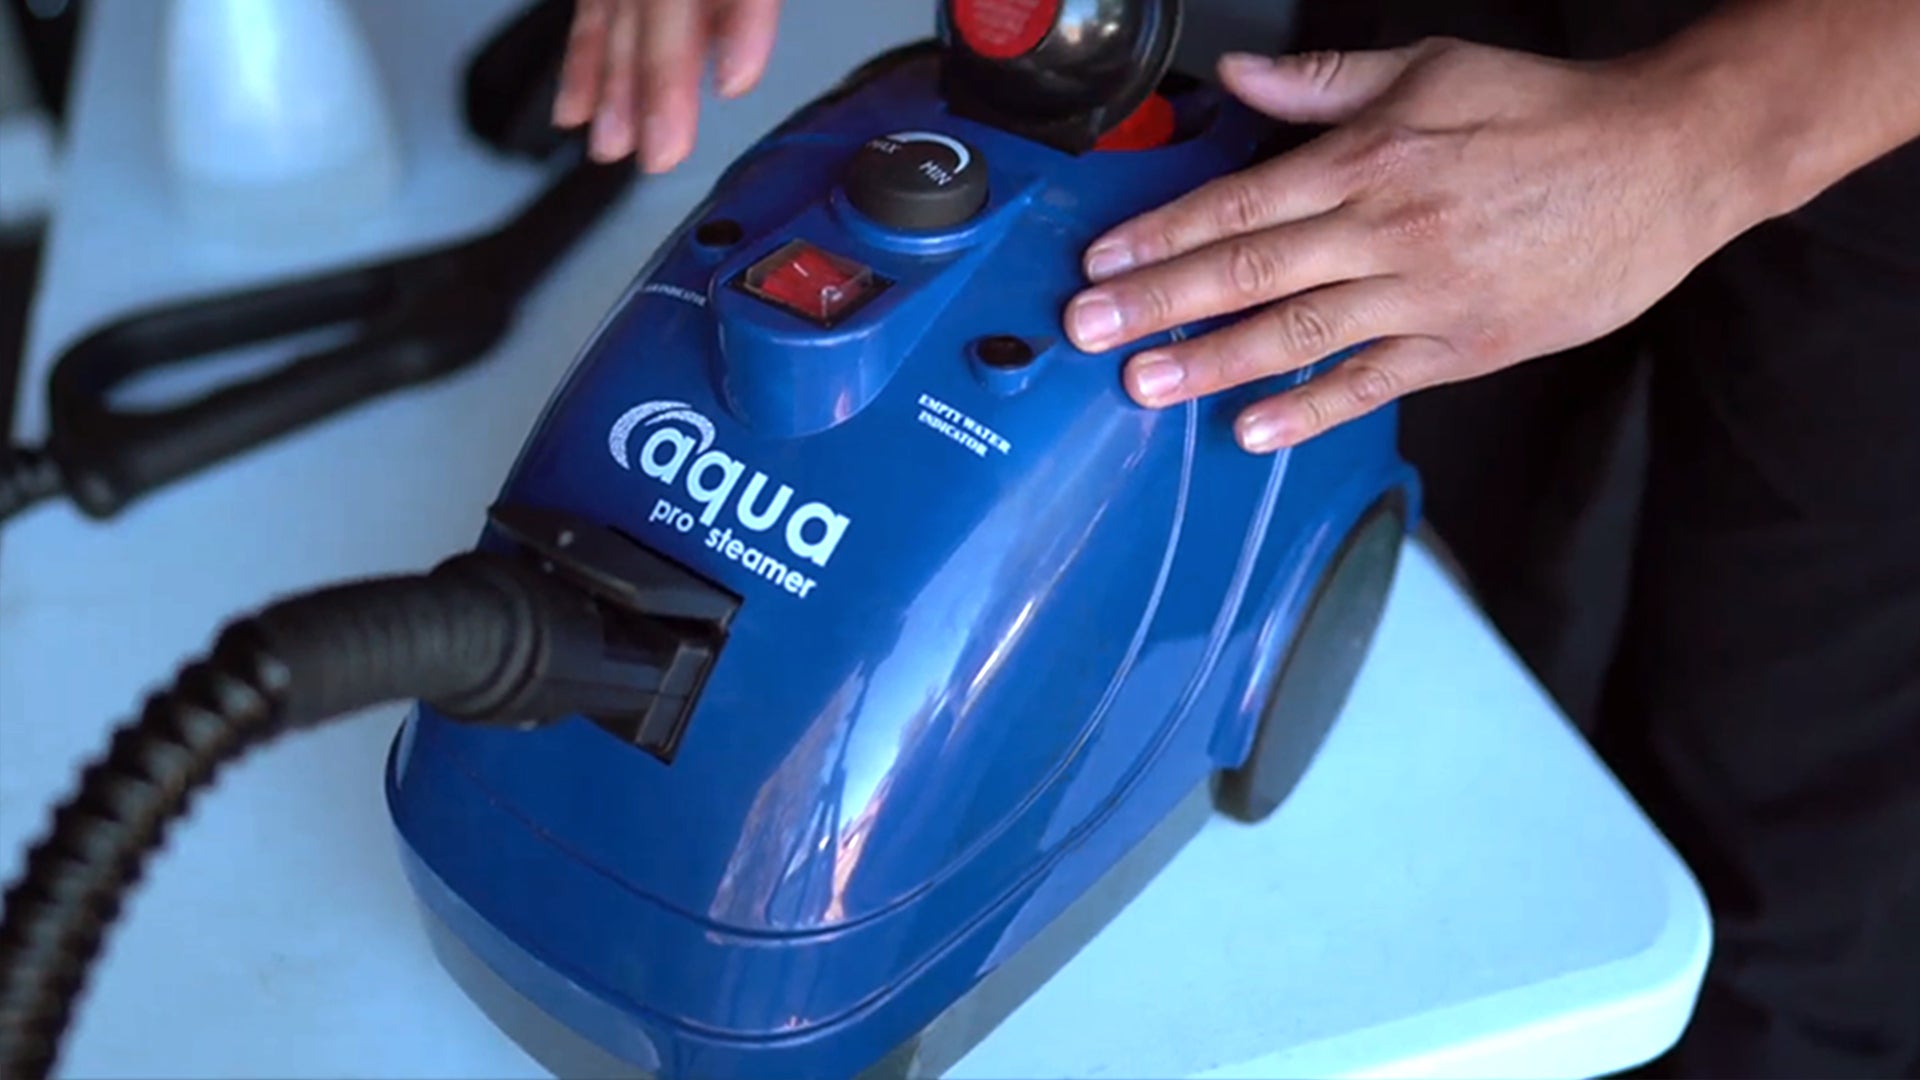 Transforming Your Auto Detailing Business From Cost to Profit with the Aqua Pro Steamer